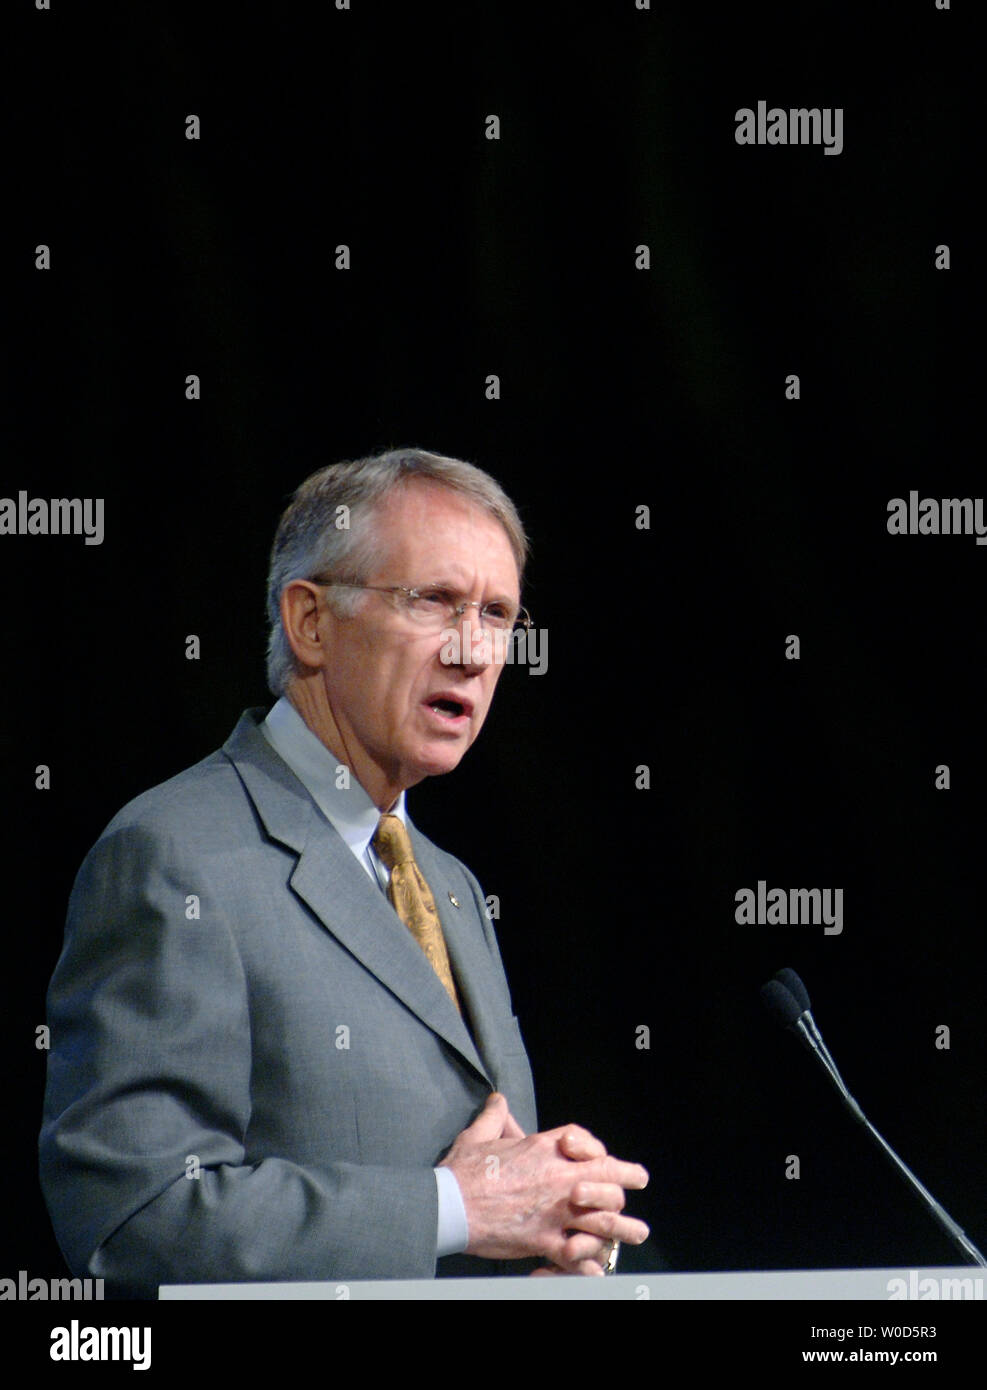 Senate Minority Leader Harry Reid (D-NEV) speaks at the NAACP Conference in Washington on July 17, 2006. Reid spoke on the historical significance of the NAACP and spoke on the need to reinstate the voting rights act. (UPI Photo/Kevin Dietsch) Stock Photo